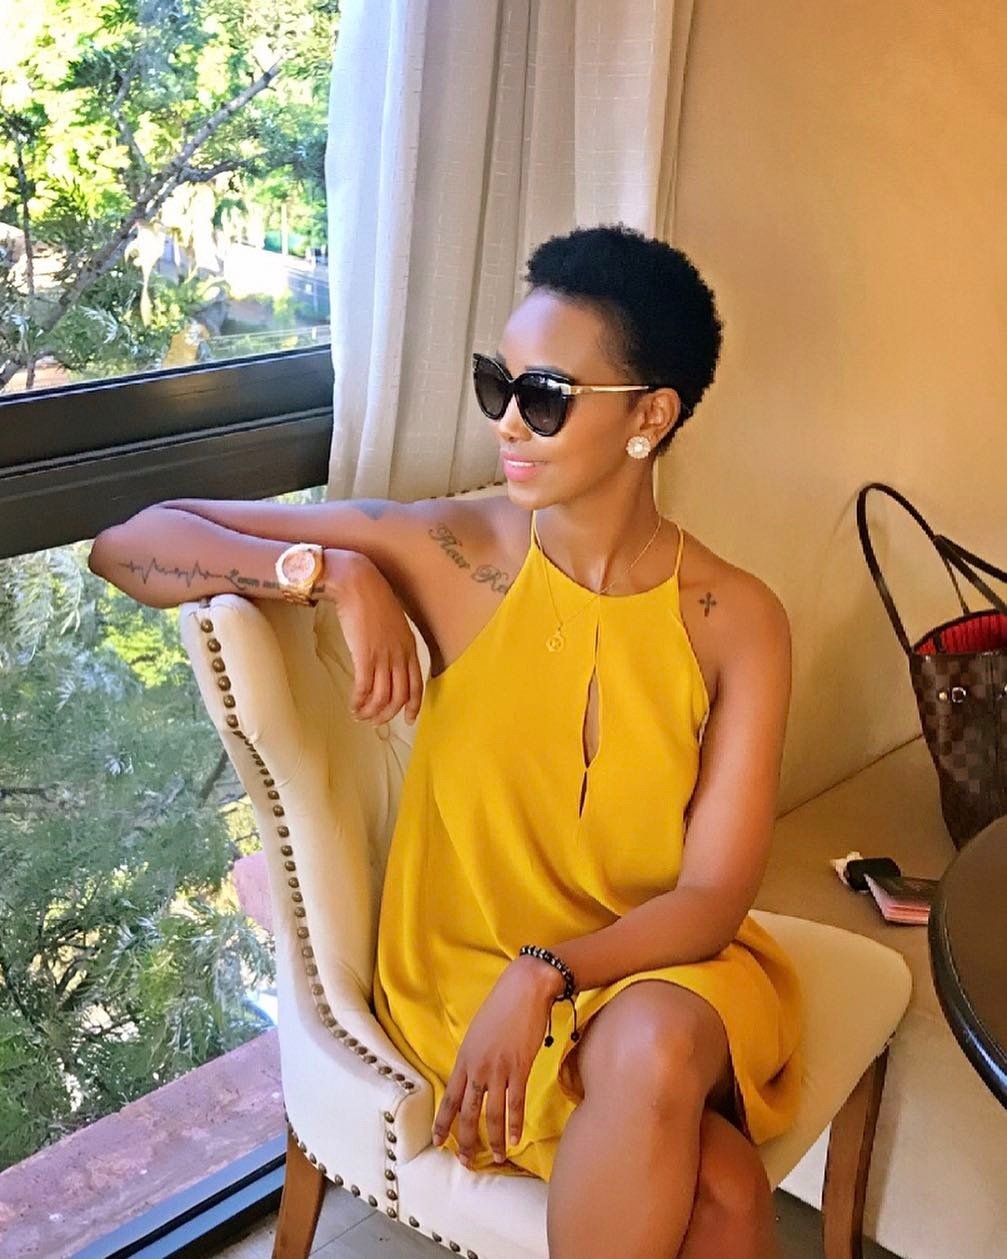 Huddah Monroe exposes a high government official who stole her project idea